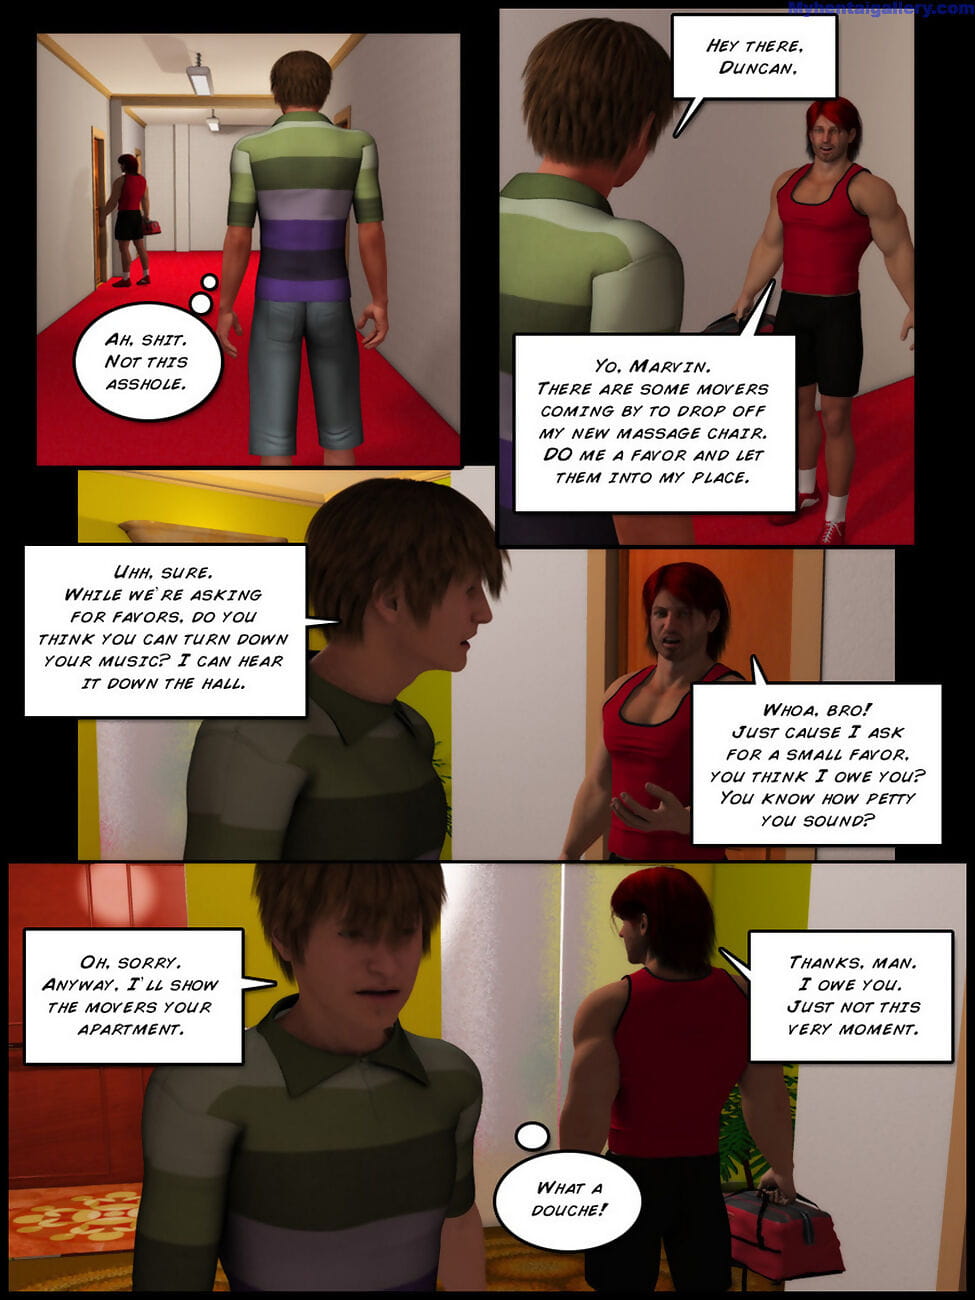 Fools Jewel 2 - Chapter 1 - part 2 page 1